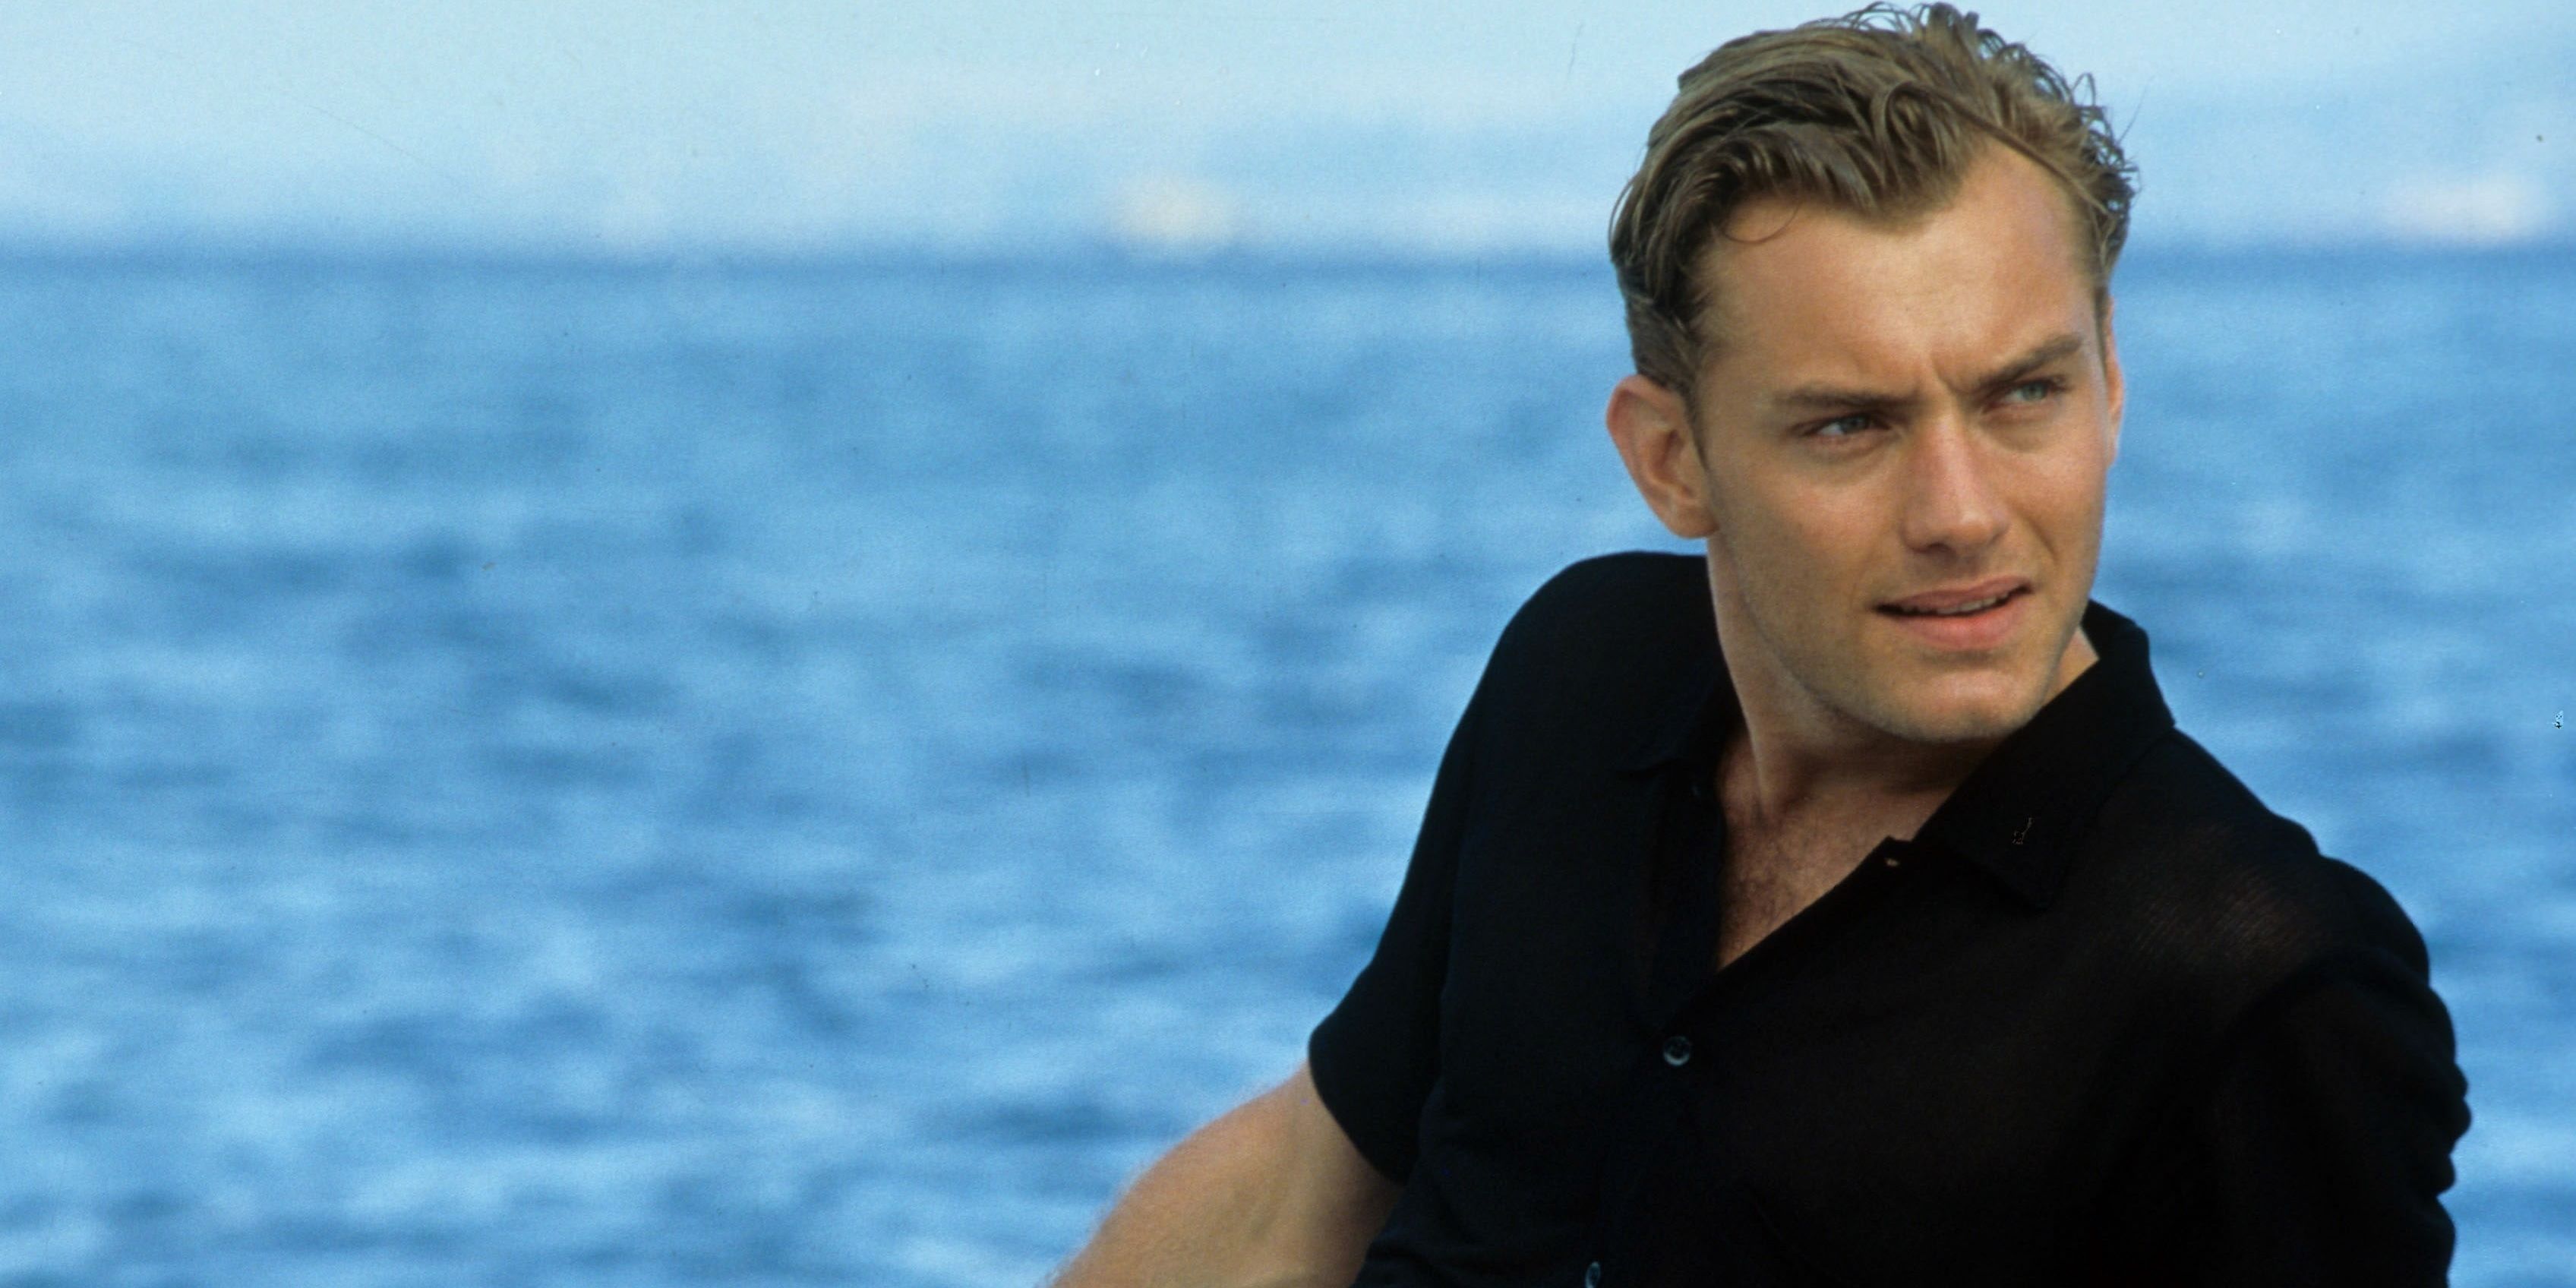 Jude Law as Dickie Greenleaf in The Talented Mr Ripley